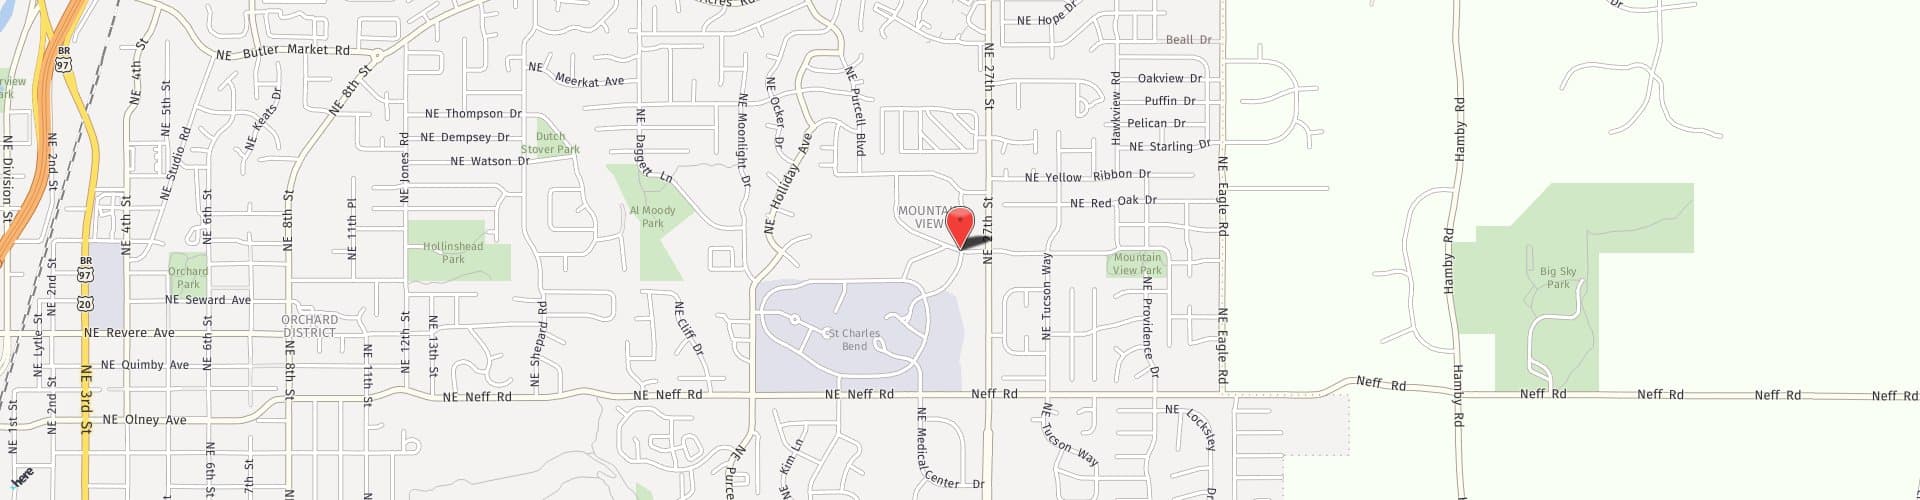 Location Map: 2546 NE Conners Ave. Bend, Oregon 97701